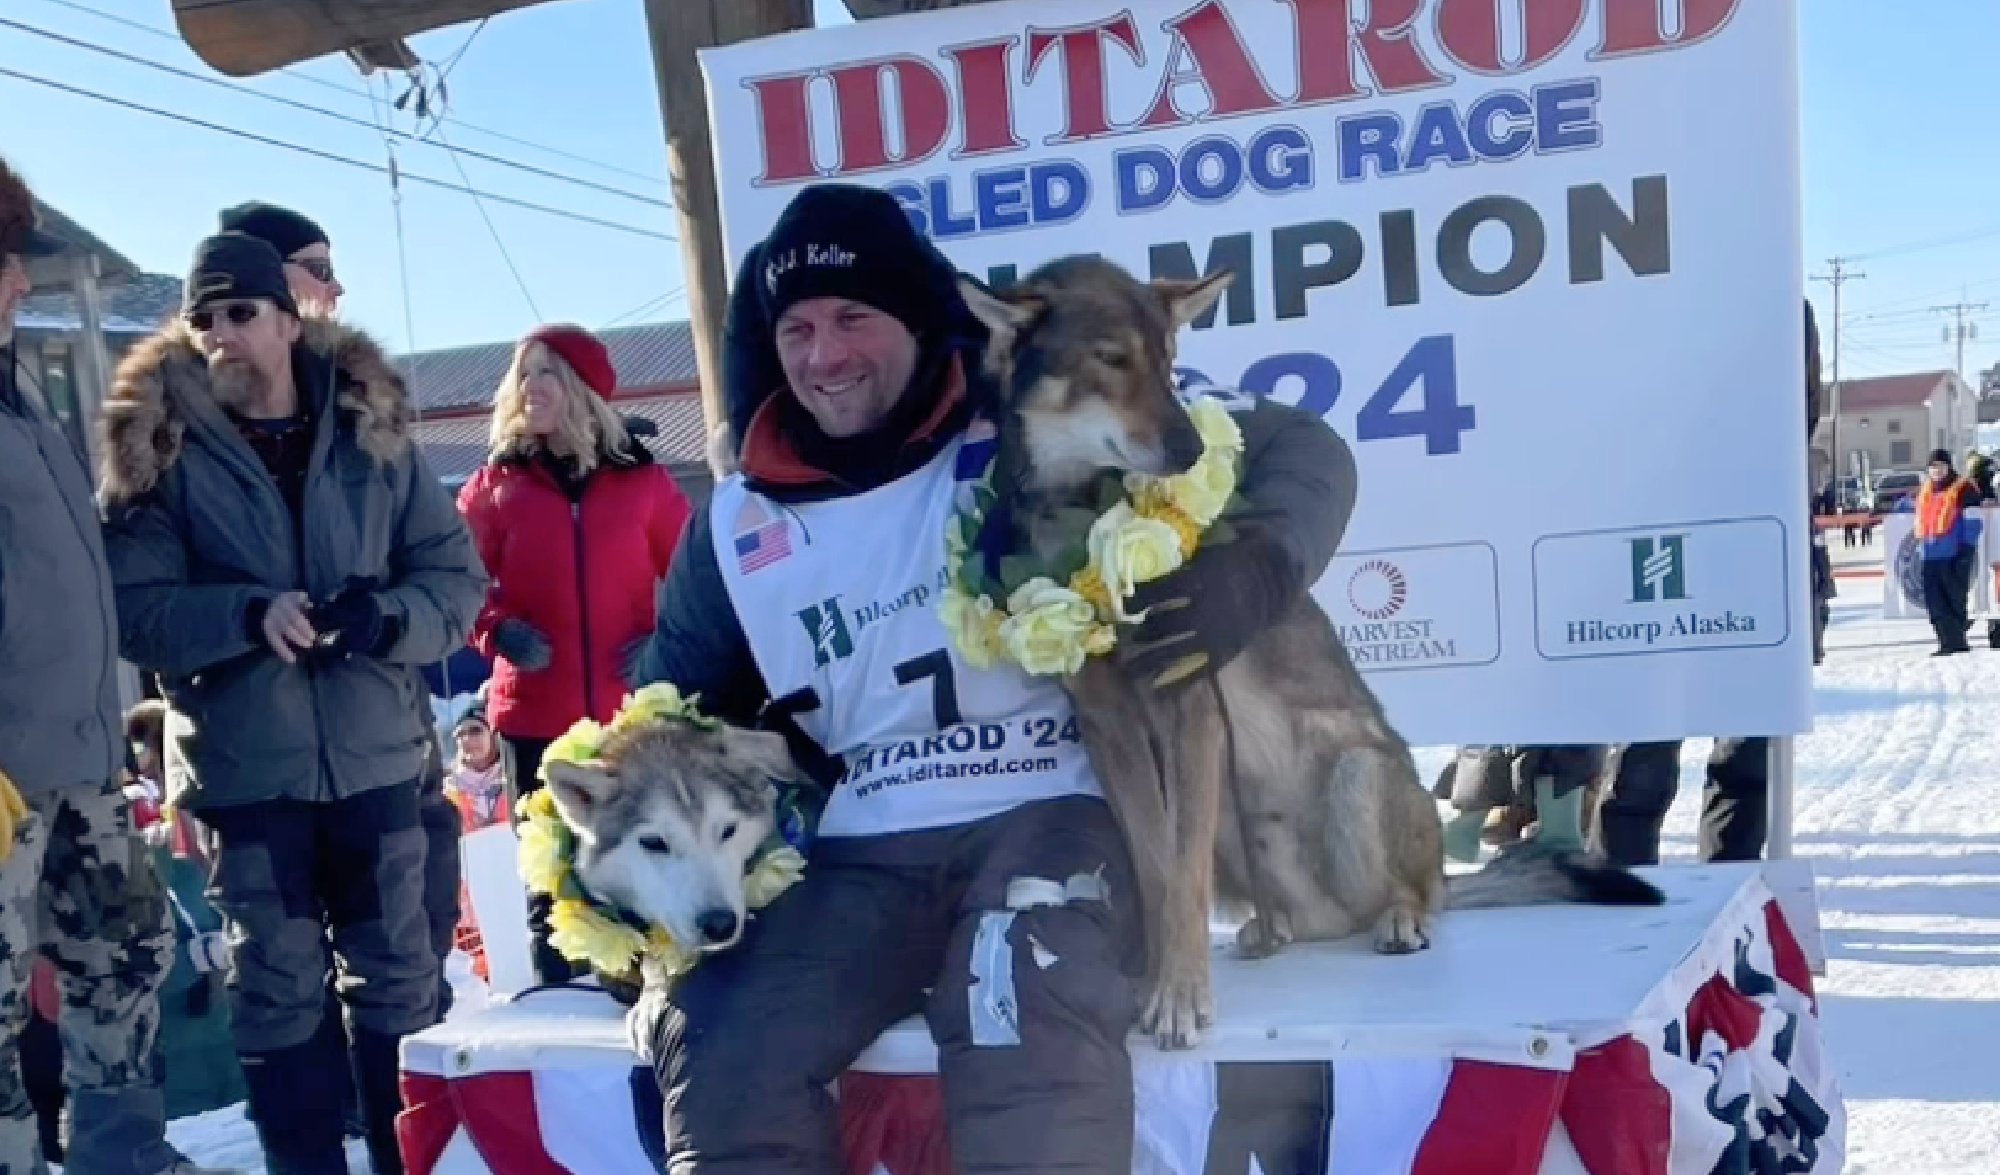 Seavey Wins Iditarod, Units Document Regardless of Time Penalty After